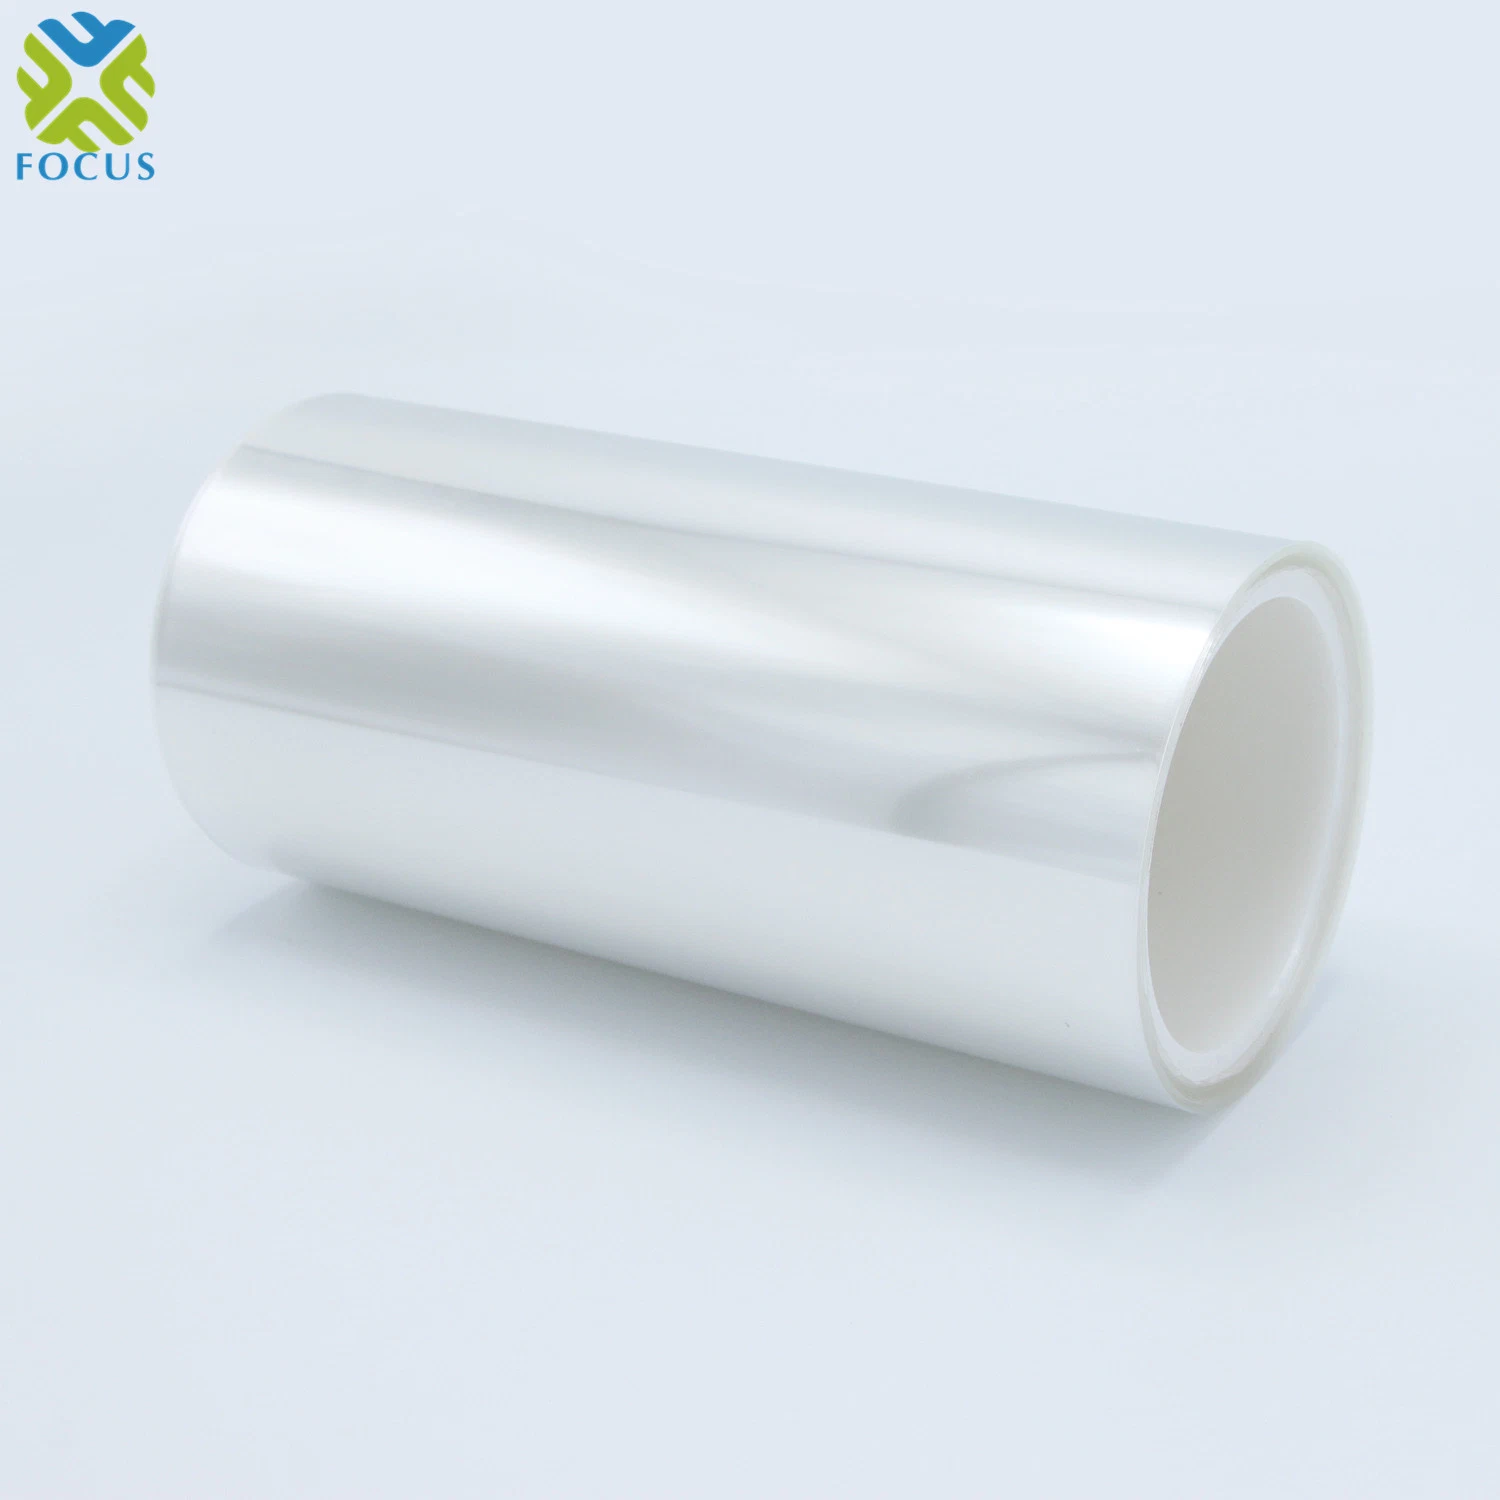 High Quality of Clear BOPP Films for Flexible Packaging or Printing